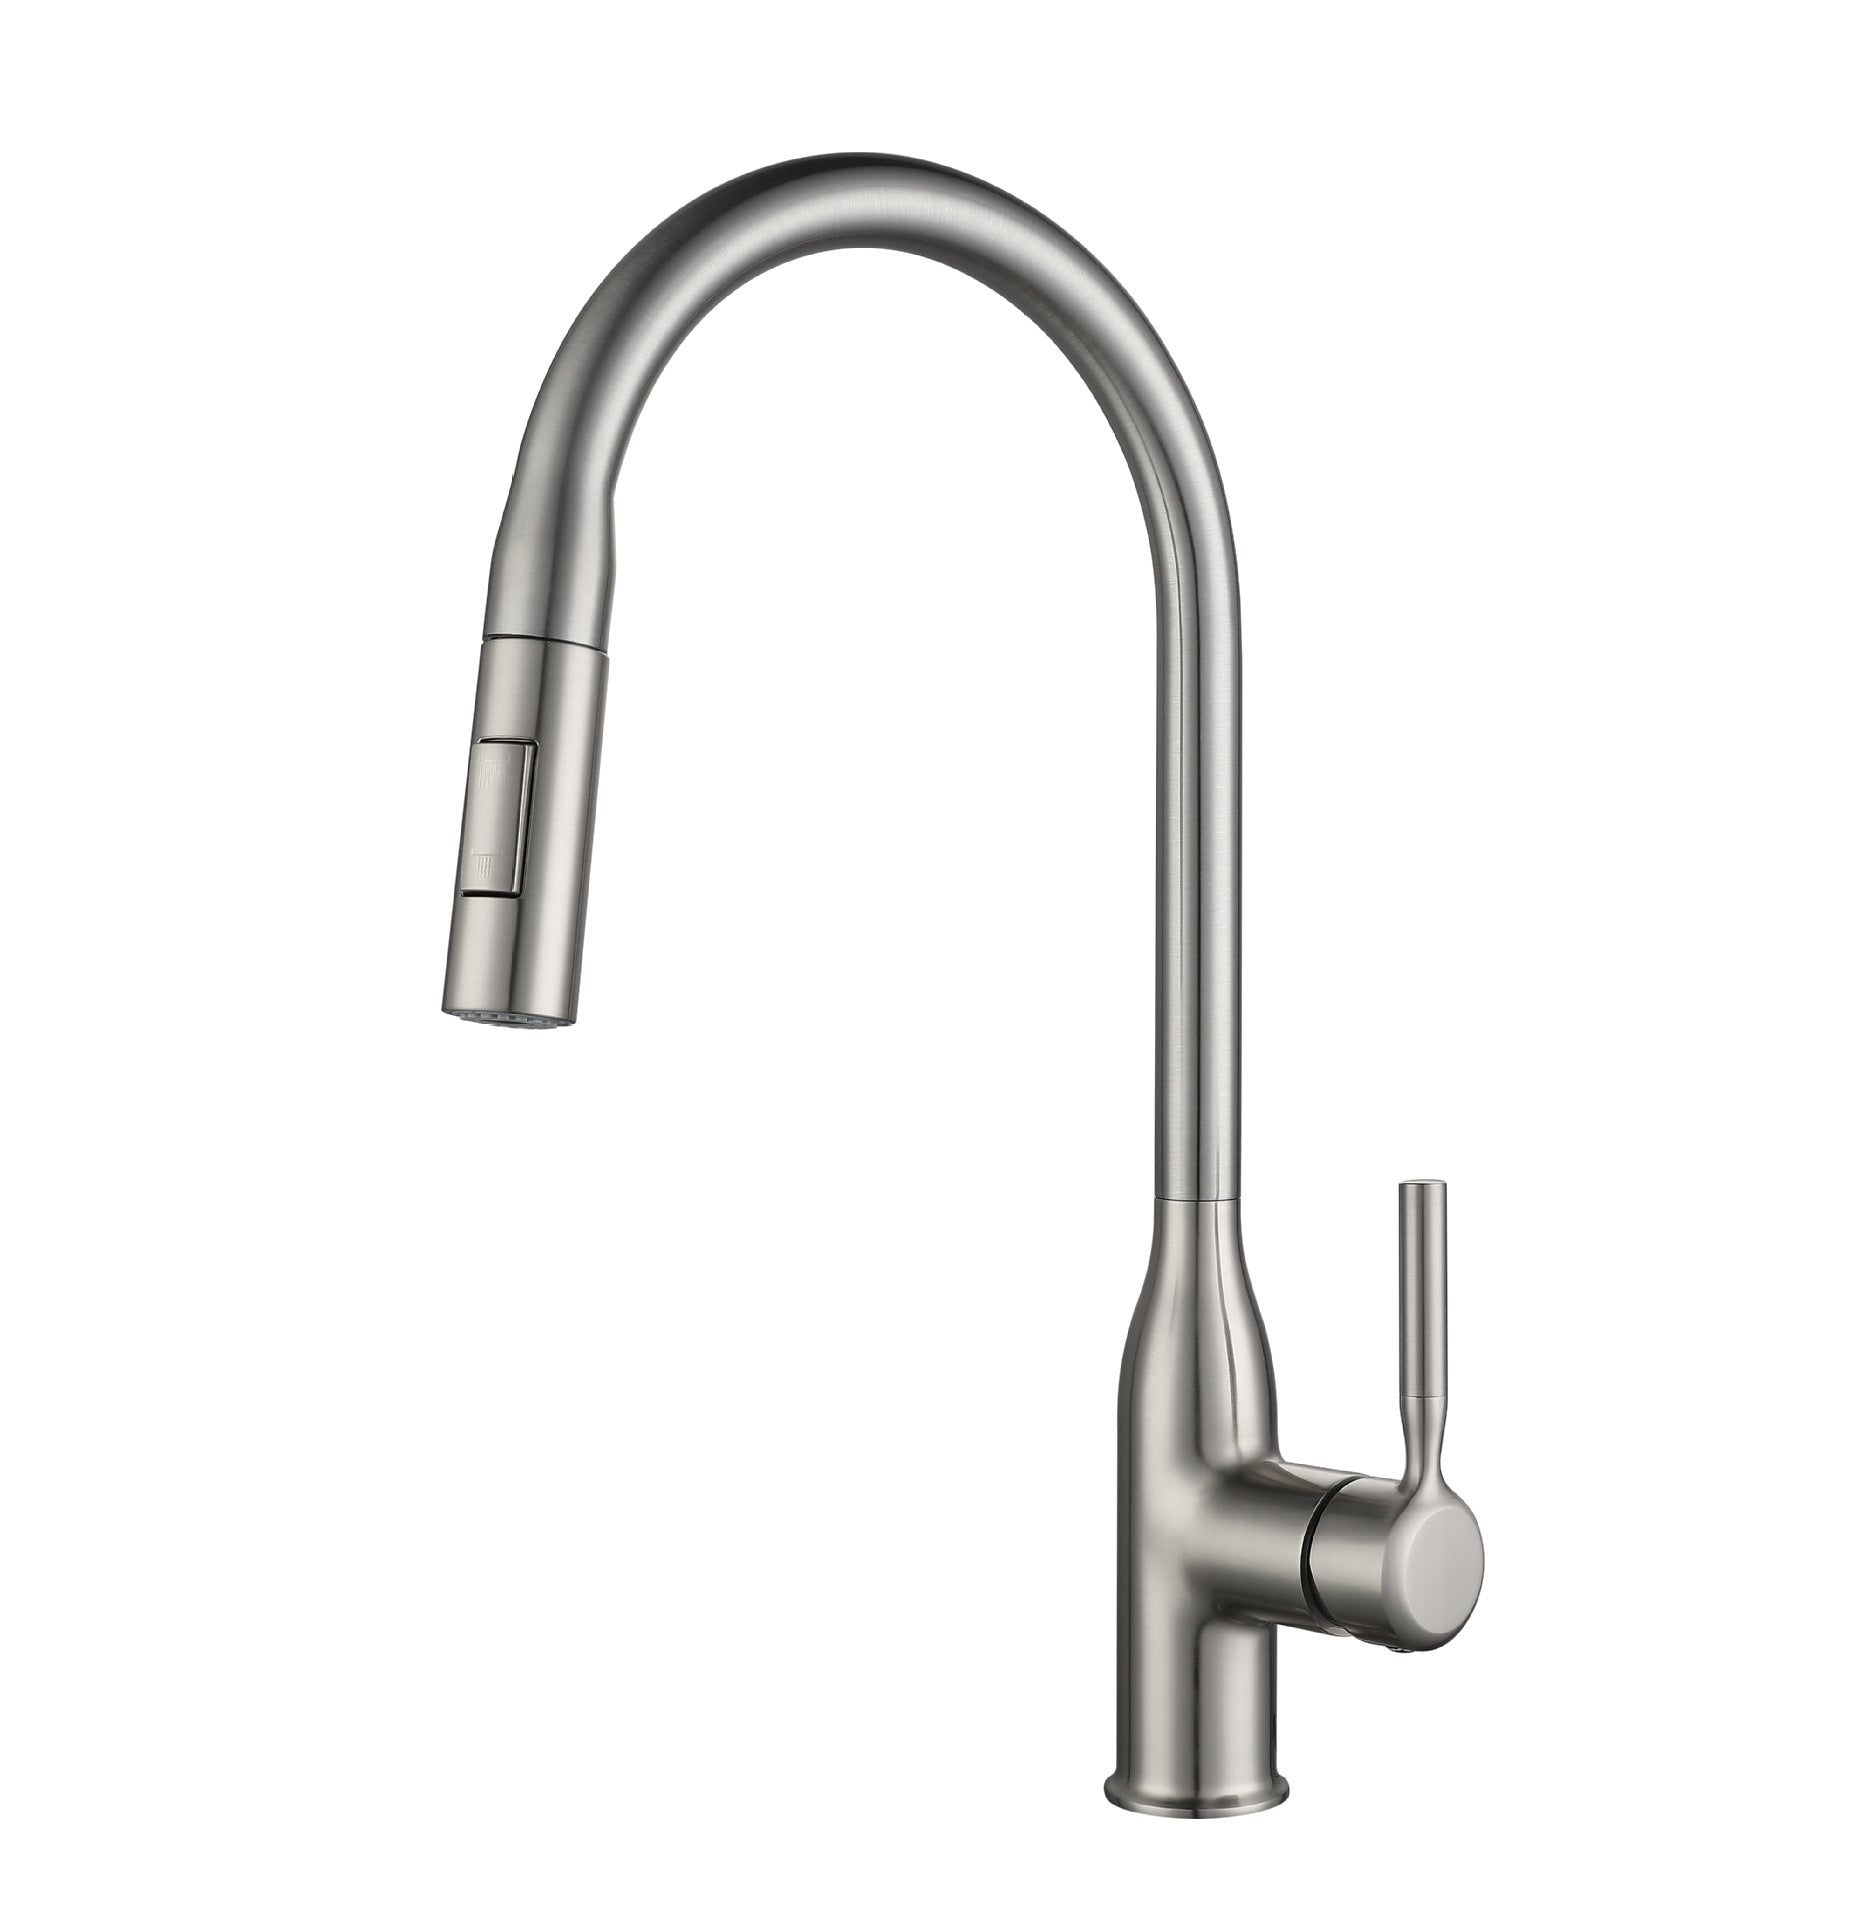 Hot and Cold Water Pull Down Sprayer Kitchen Faucet